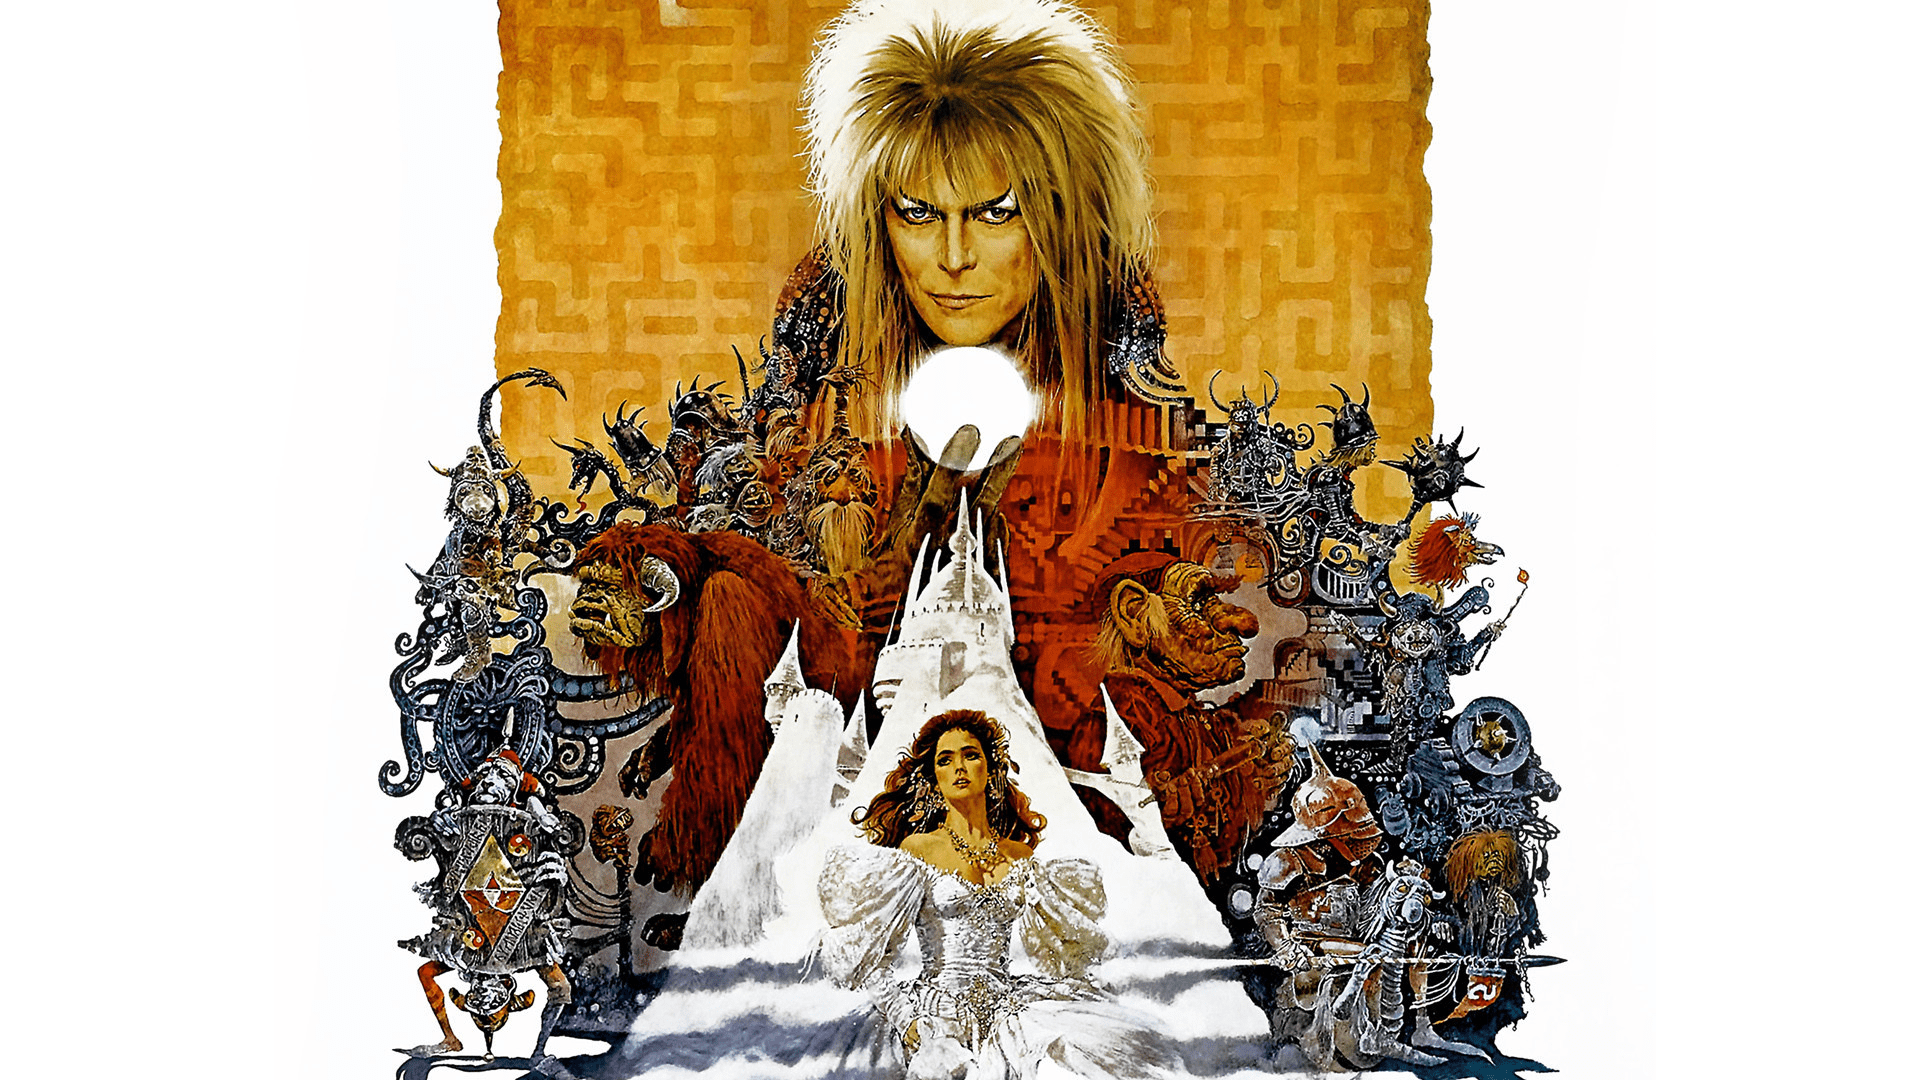 Labyrinth 1986 Wallpapers 1920x1080